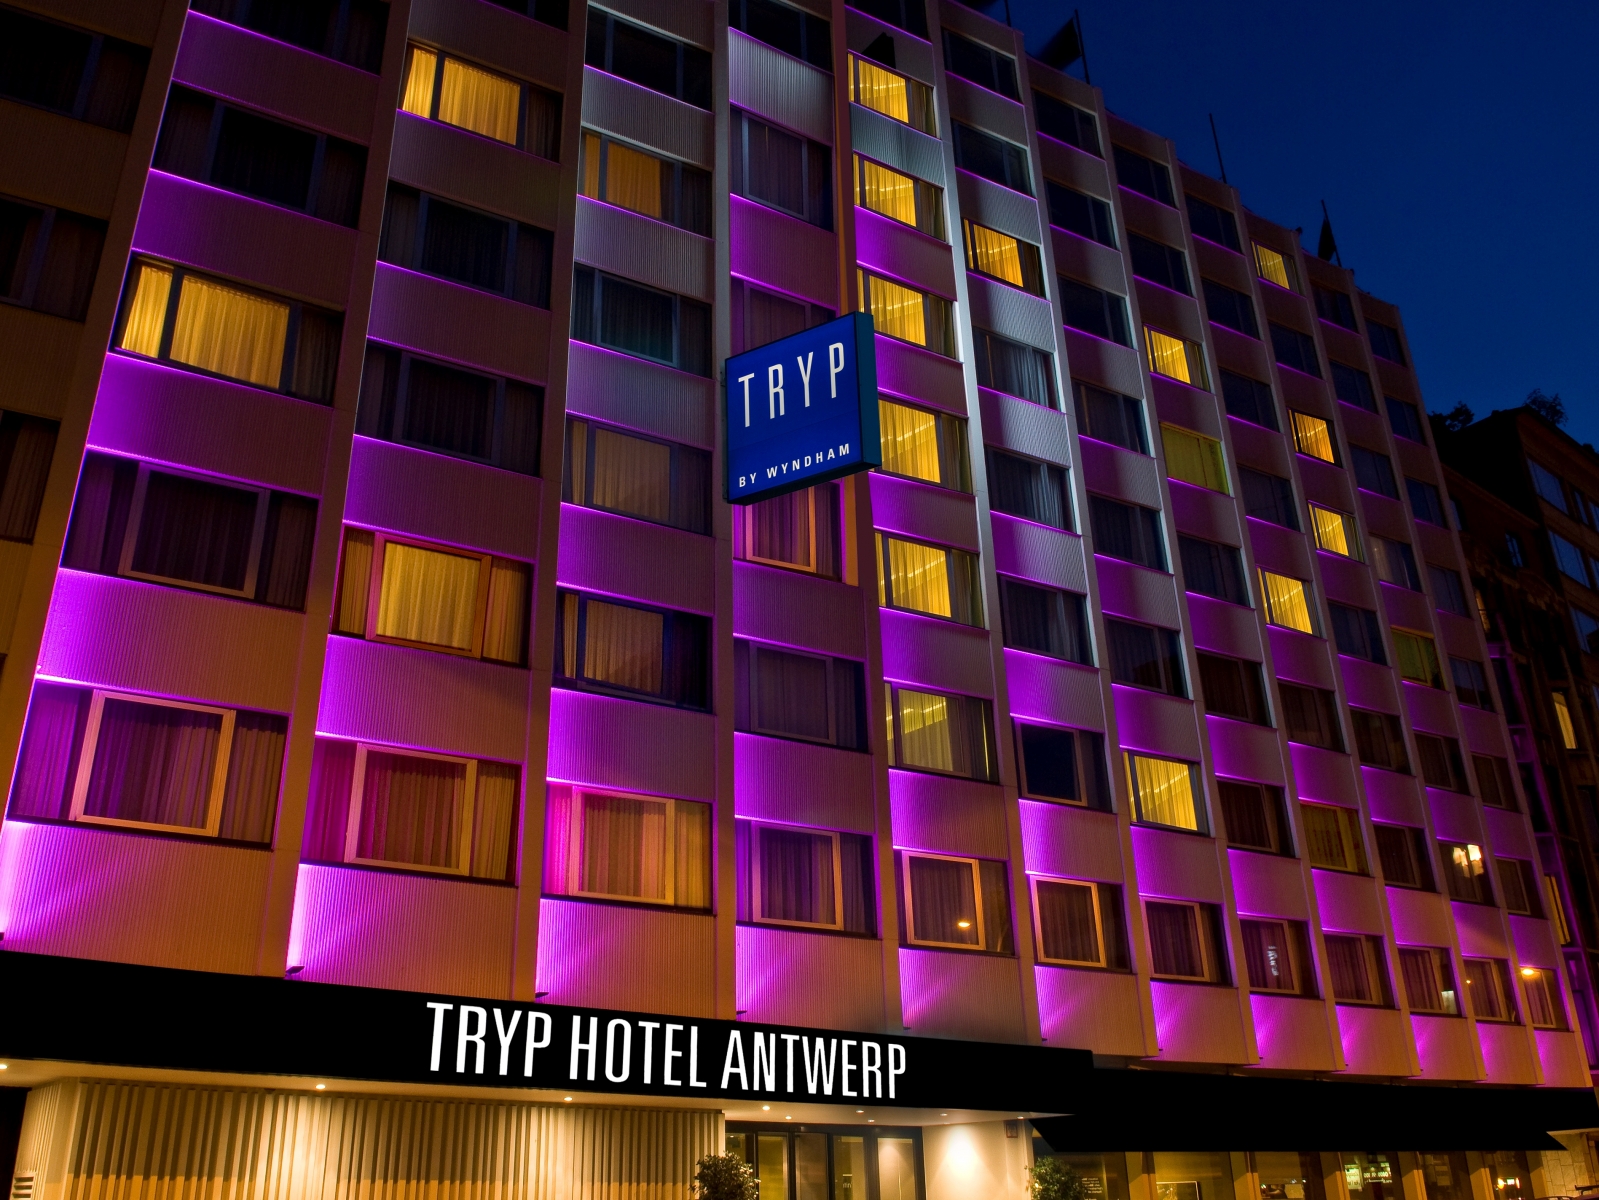 TRYP by Wyndham Antwerp <br/>60.56 ew <br/> <a href='http://vakantieoplossing.nl/outpage/?id=3e904862a12aca310c513490fb78f669' target='_blank'>View Details</a>